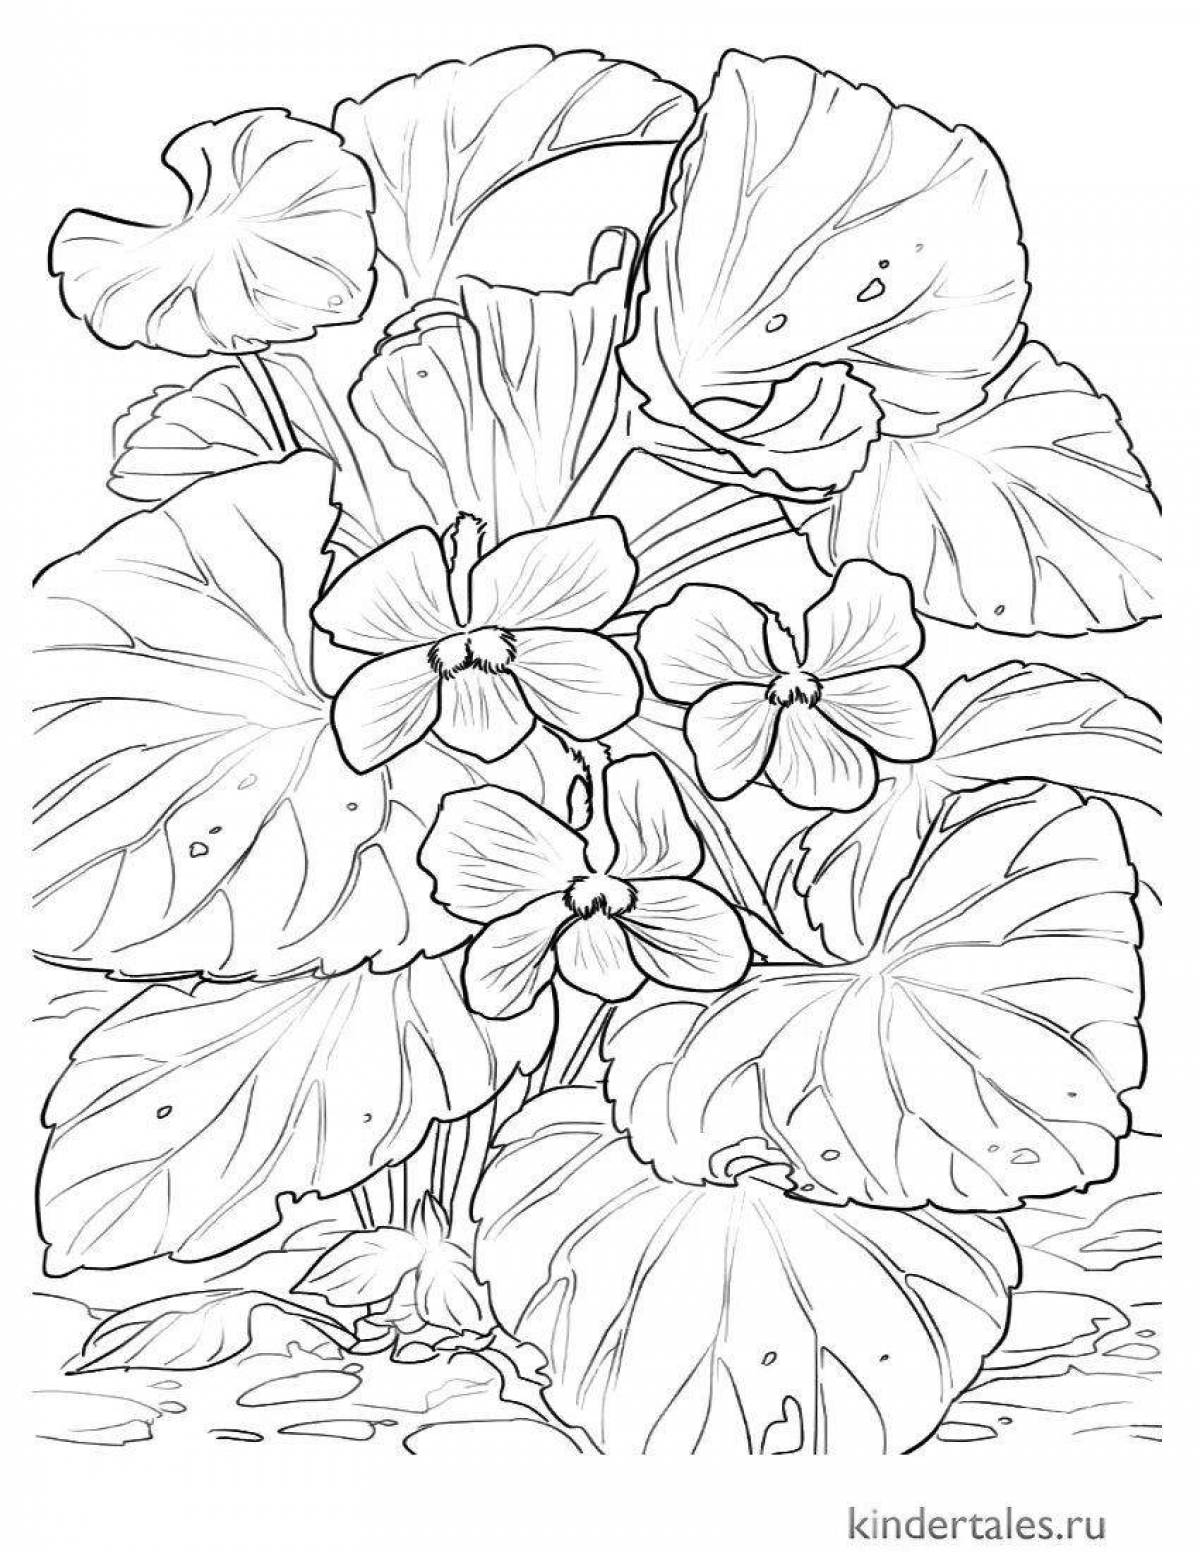 Playful purple flower coloring page